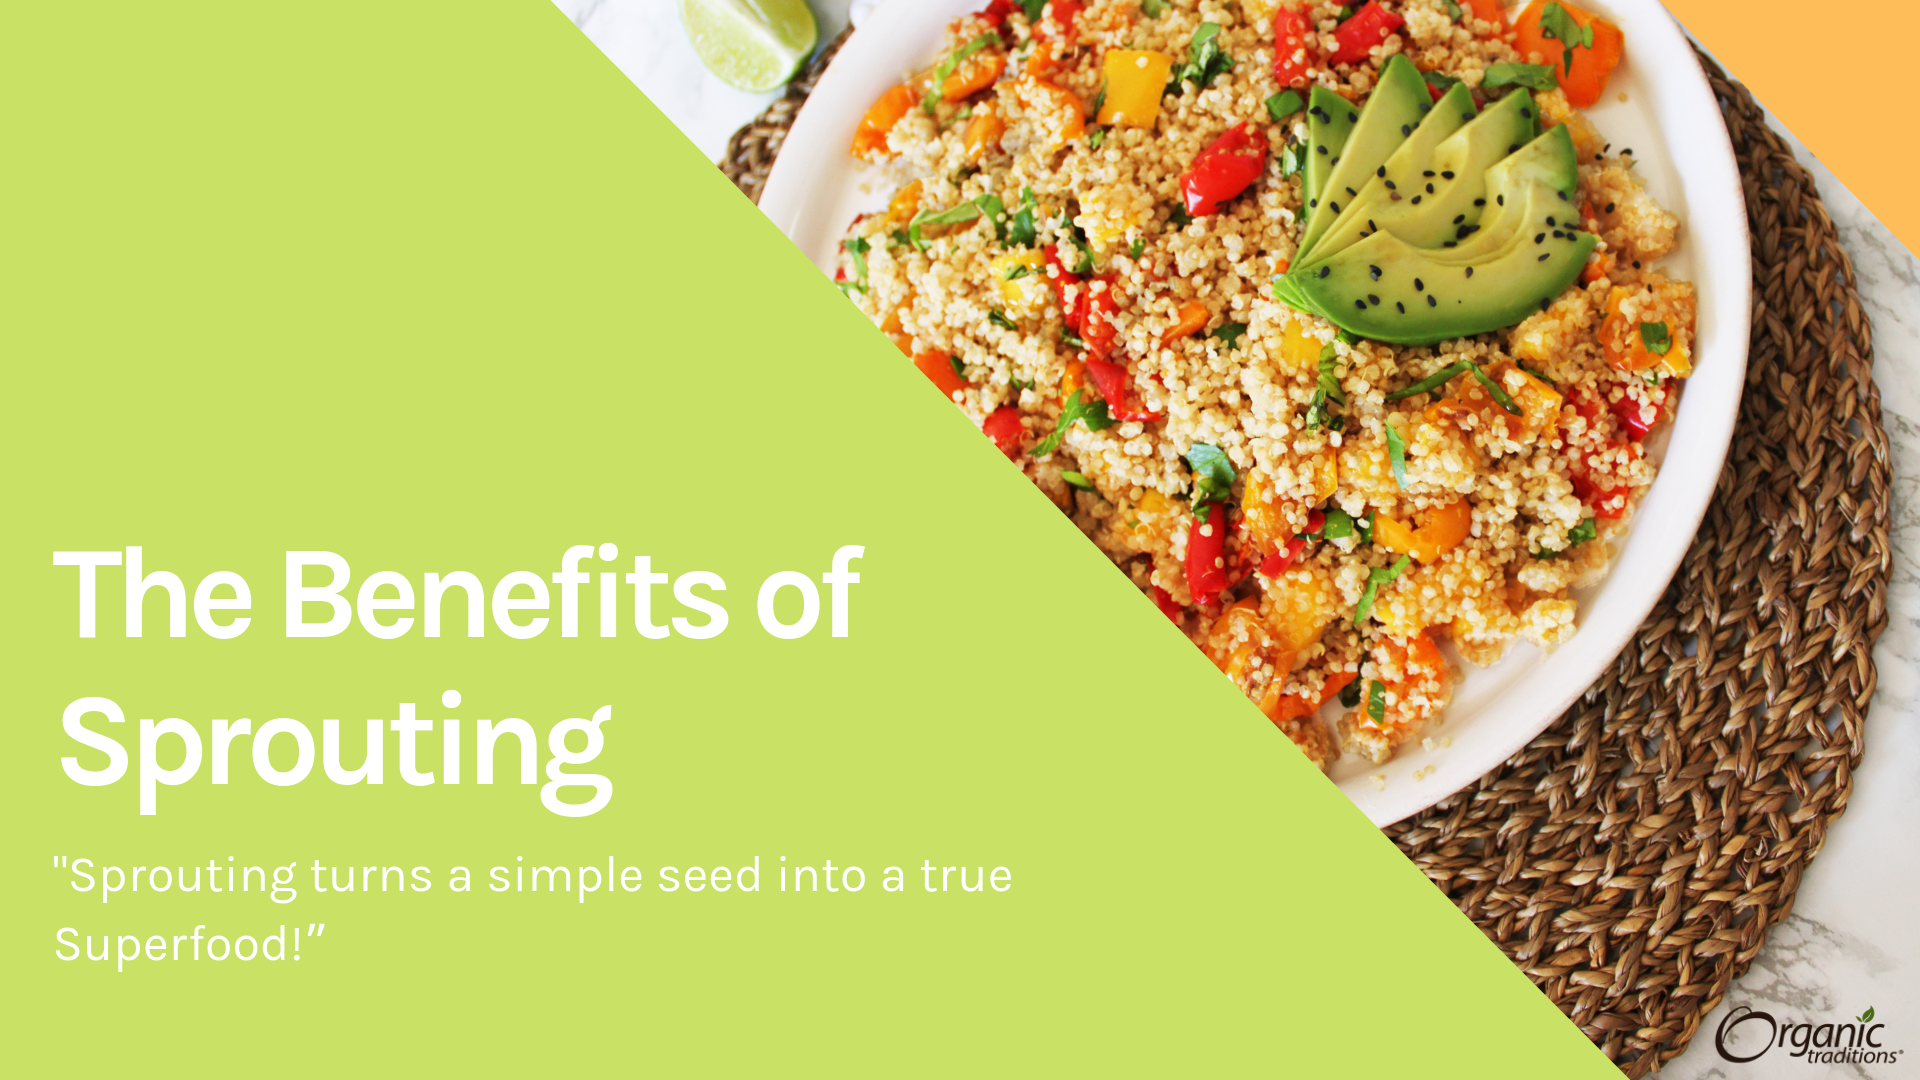 The Benefits of Sprouting